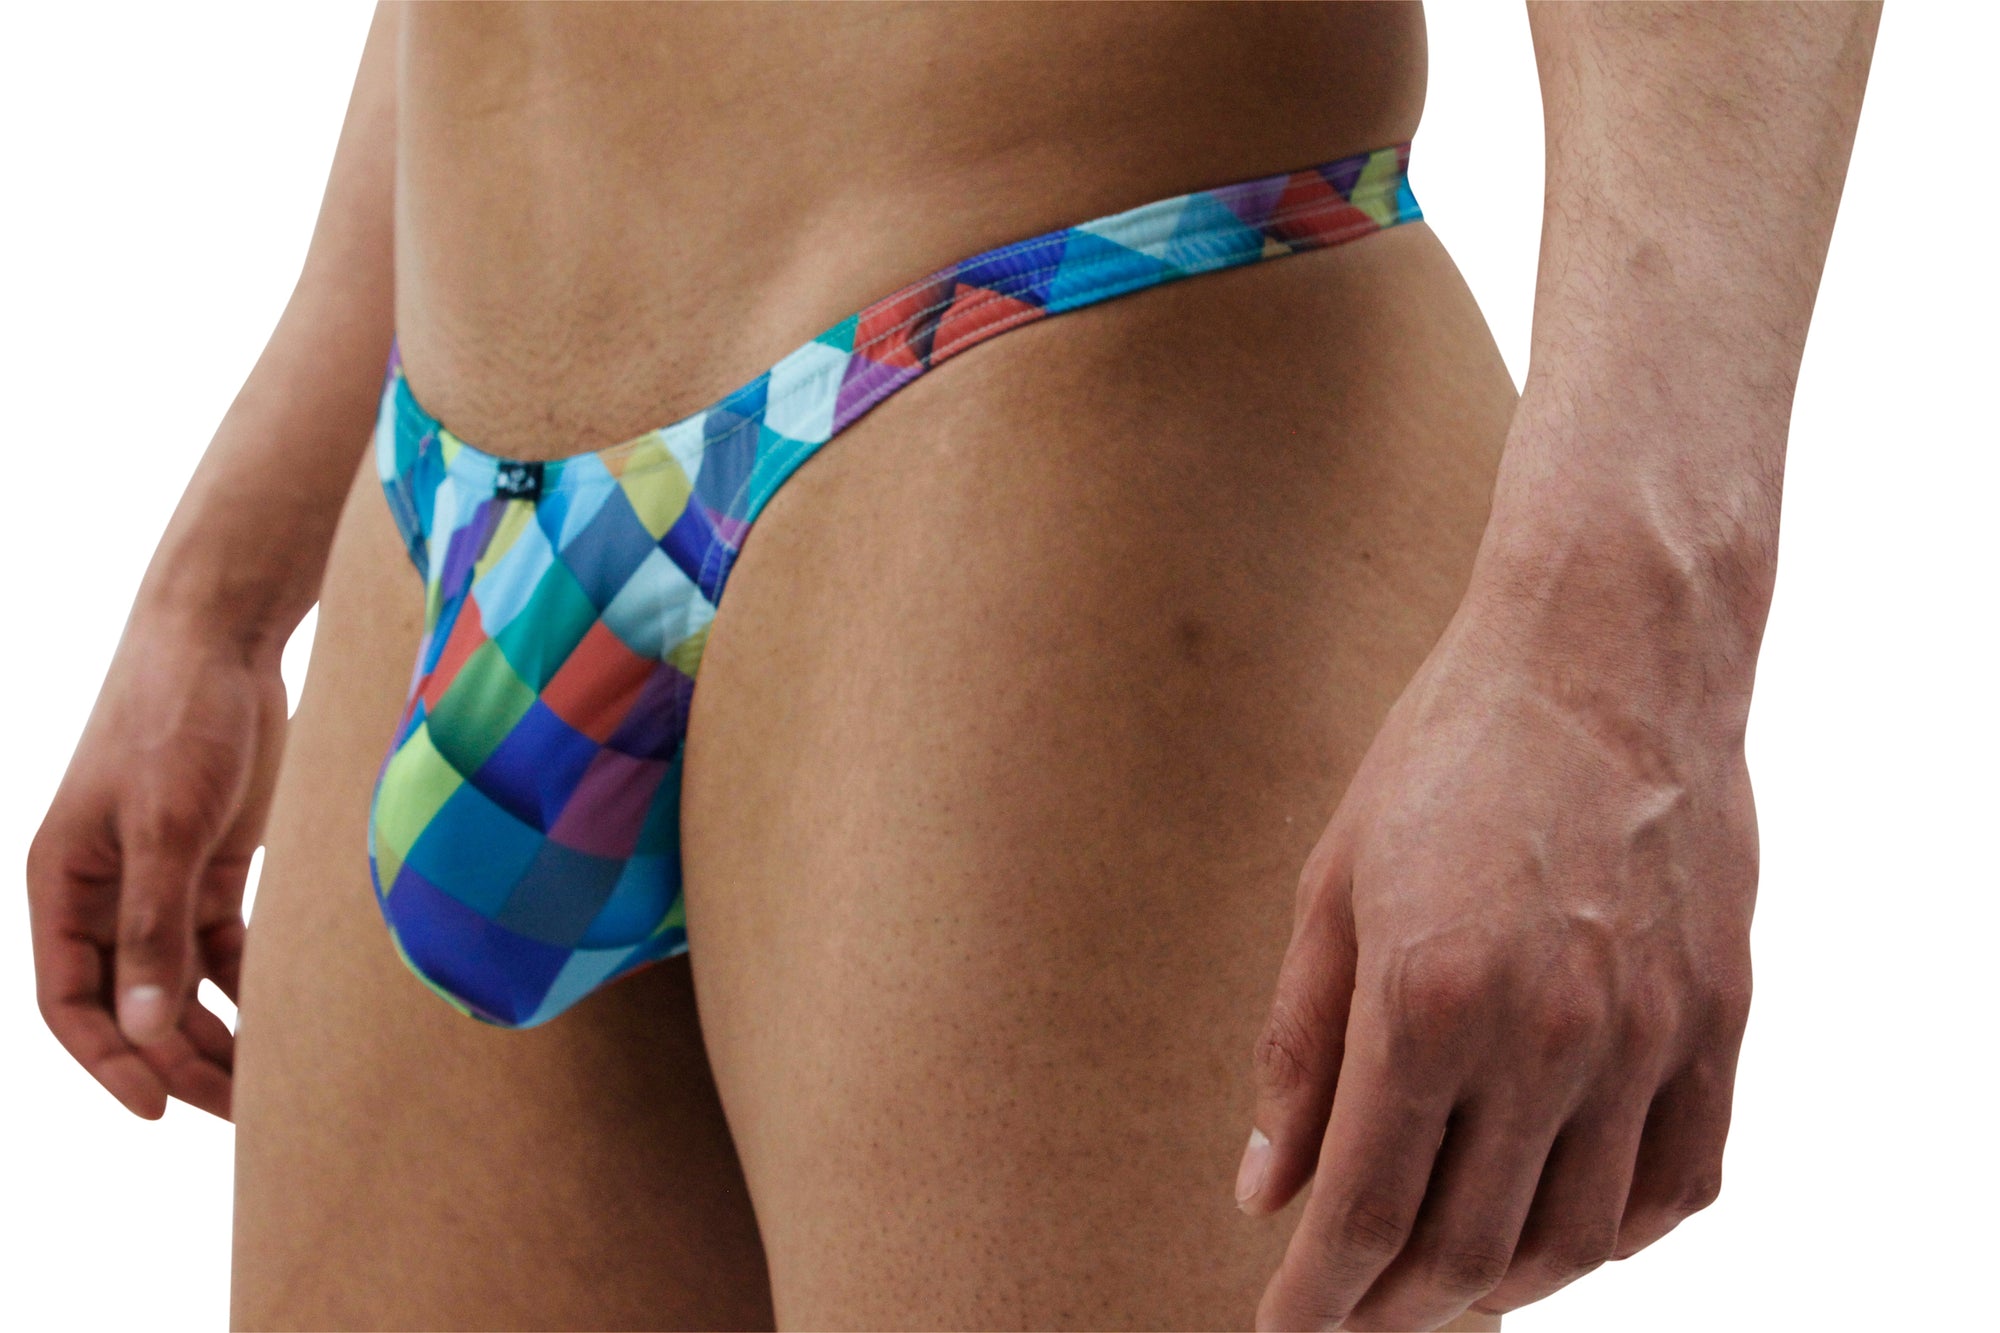 Contemporary Diamond-Patterned Men's Thong